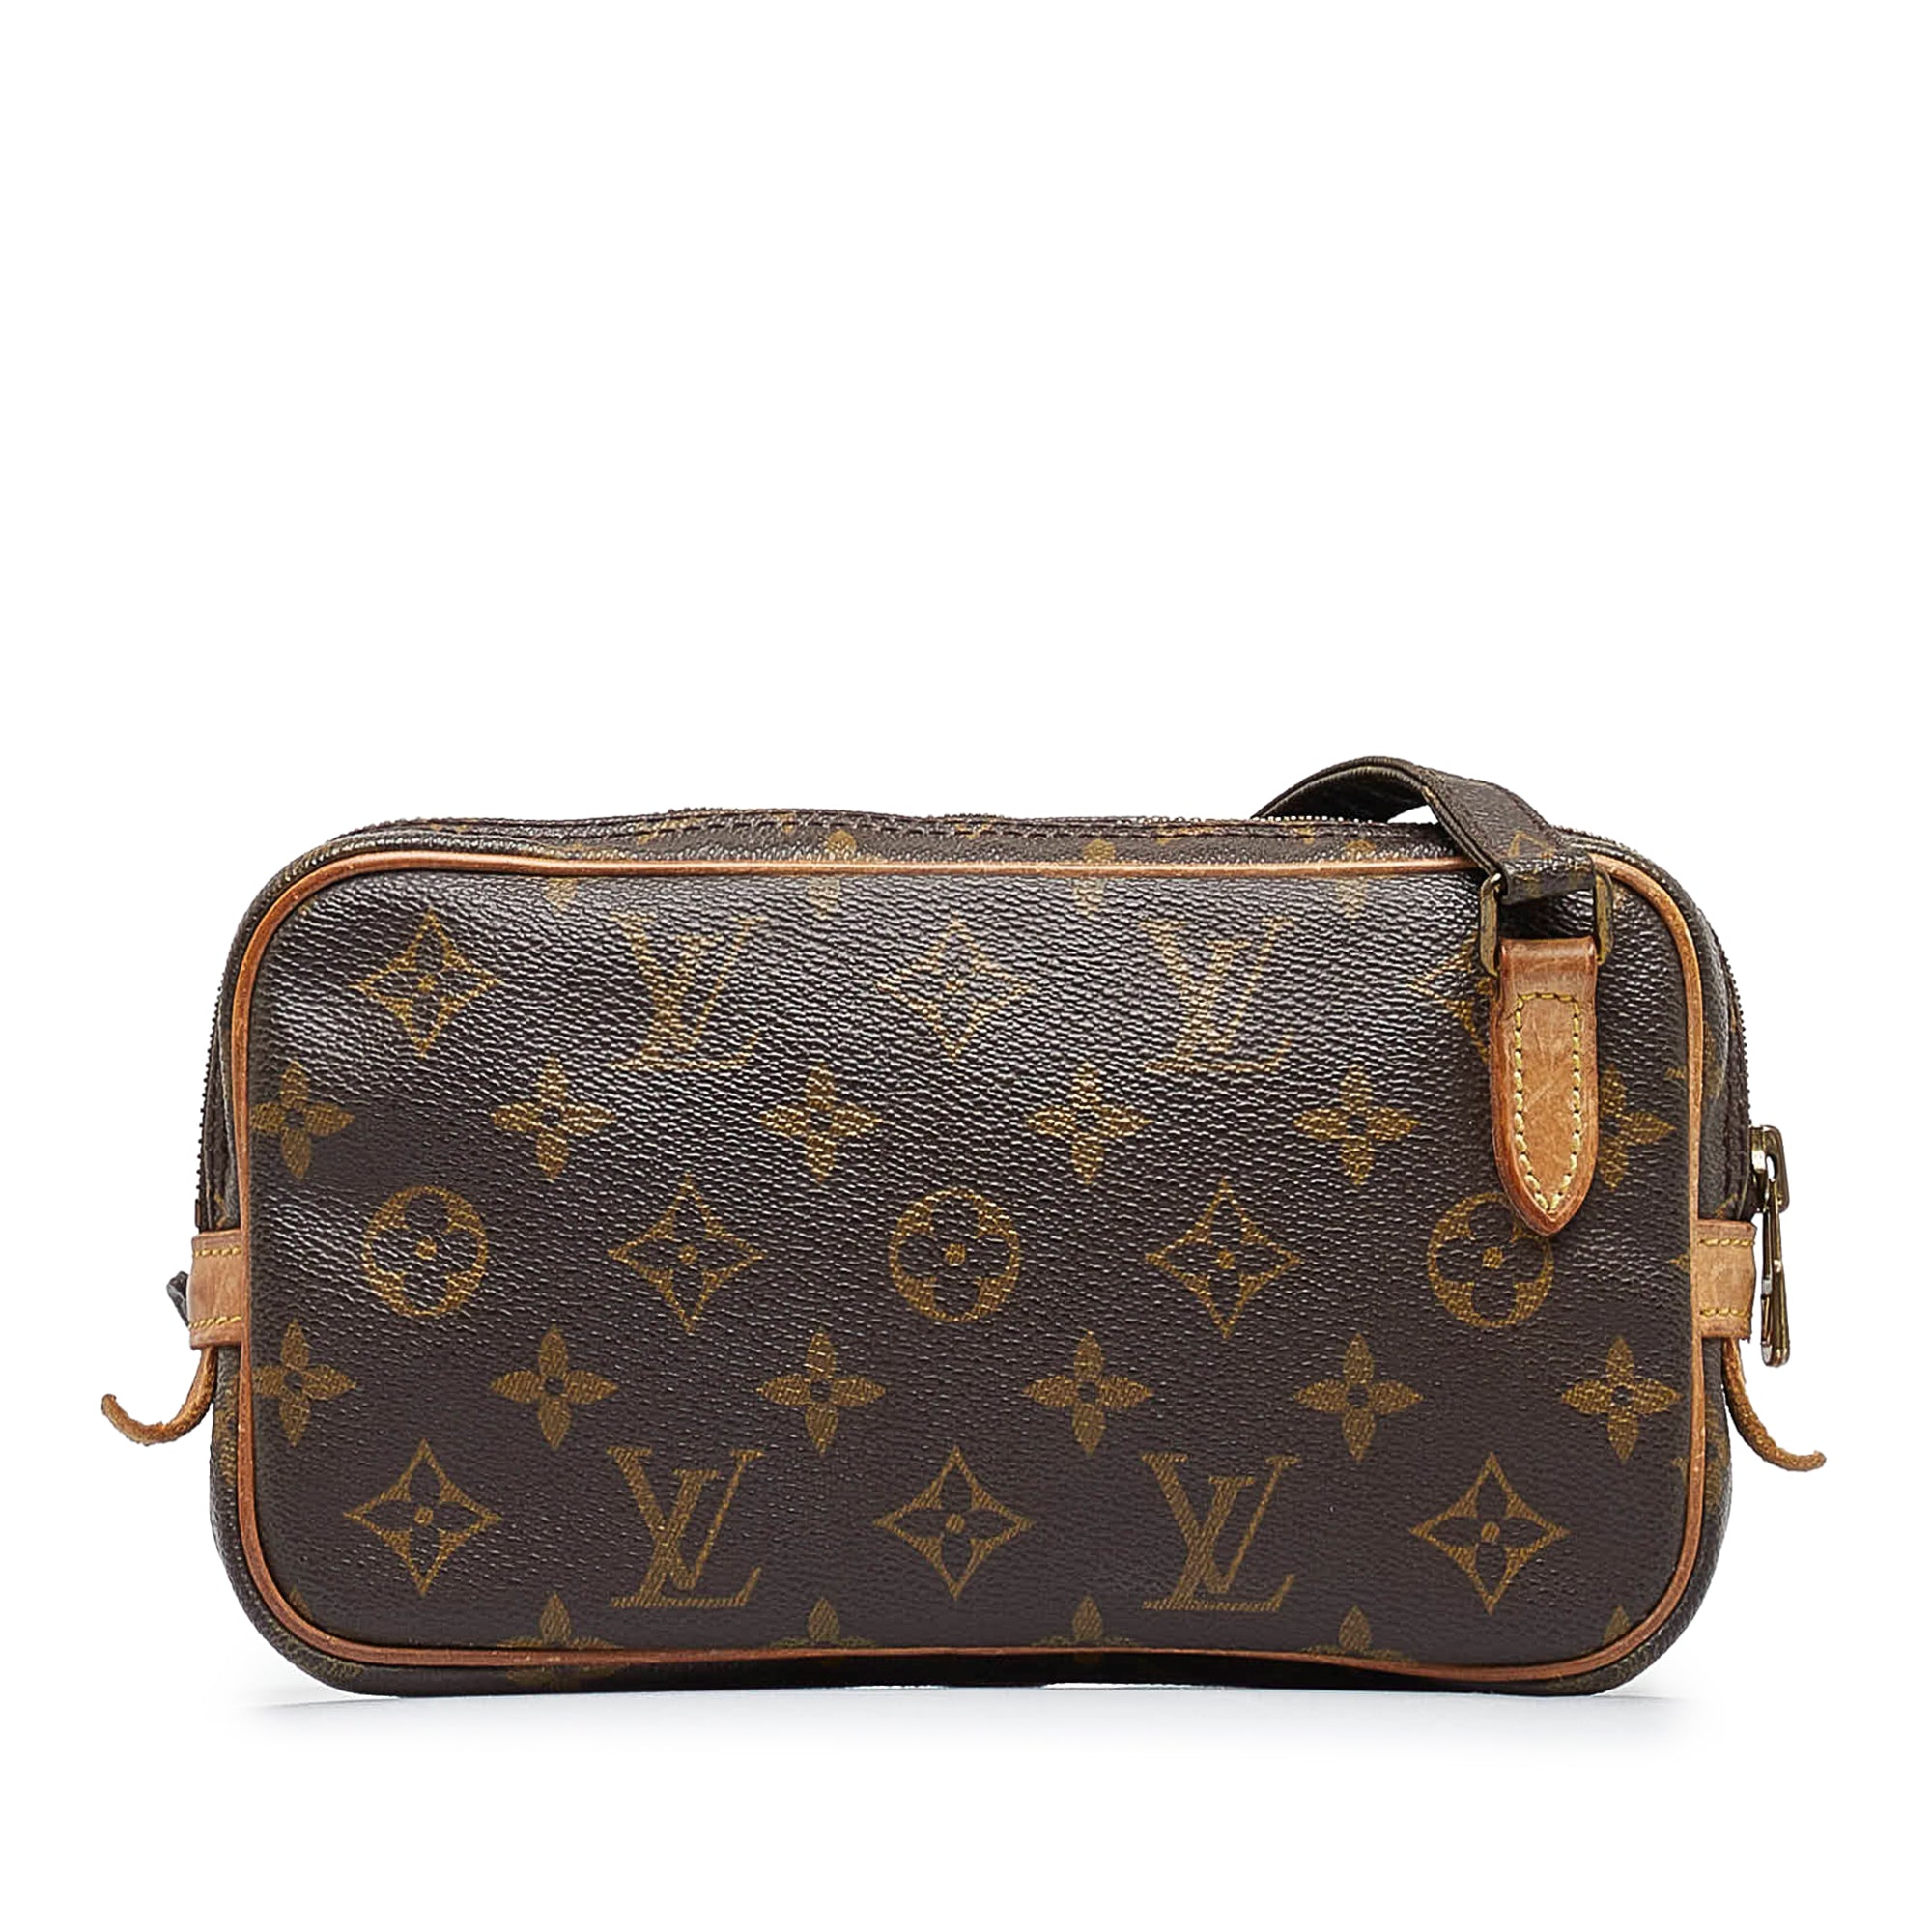 Louis Vuitton - Authenticated Marly Vintage Handbag - Leather Brown for Women, Very Good Condition